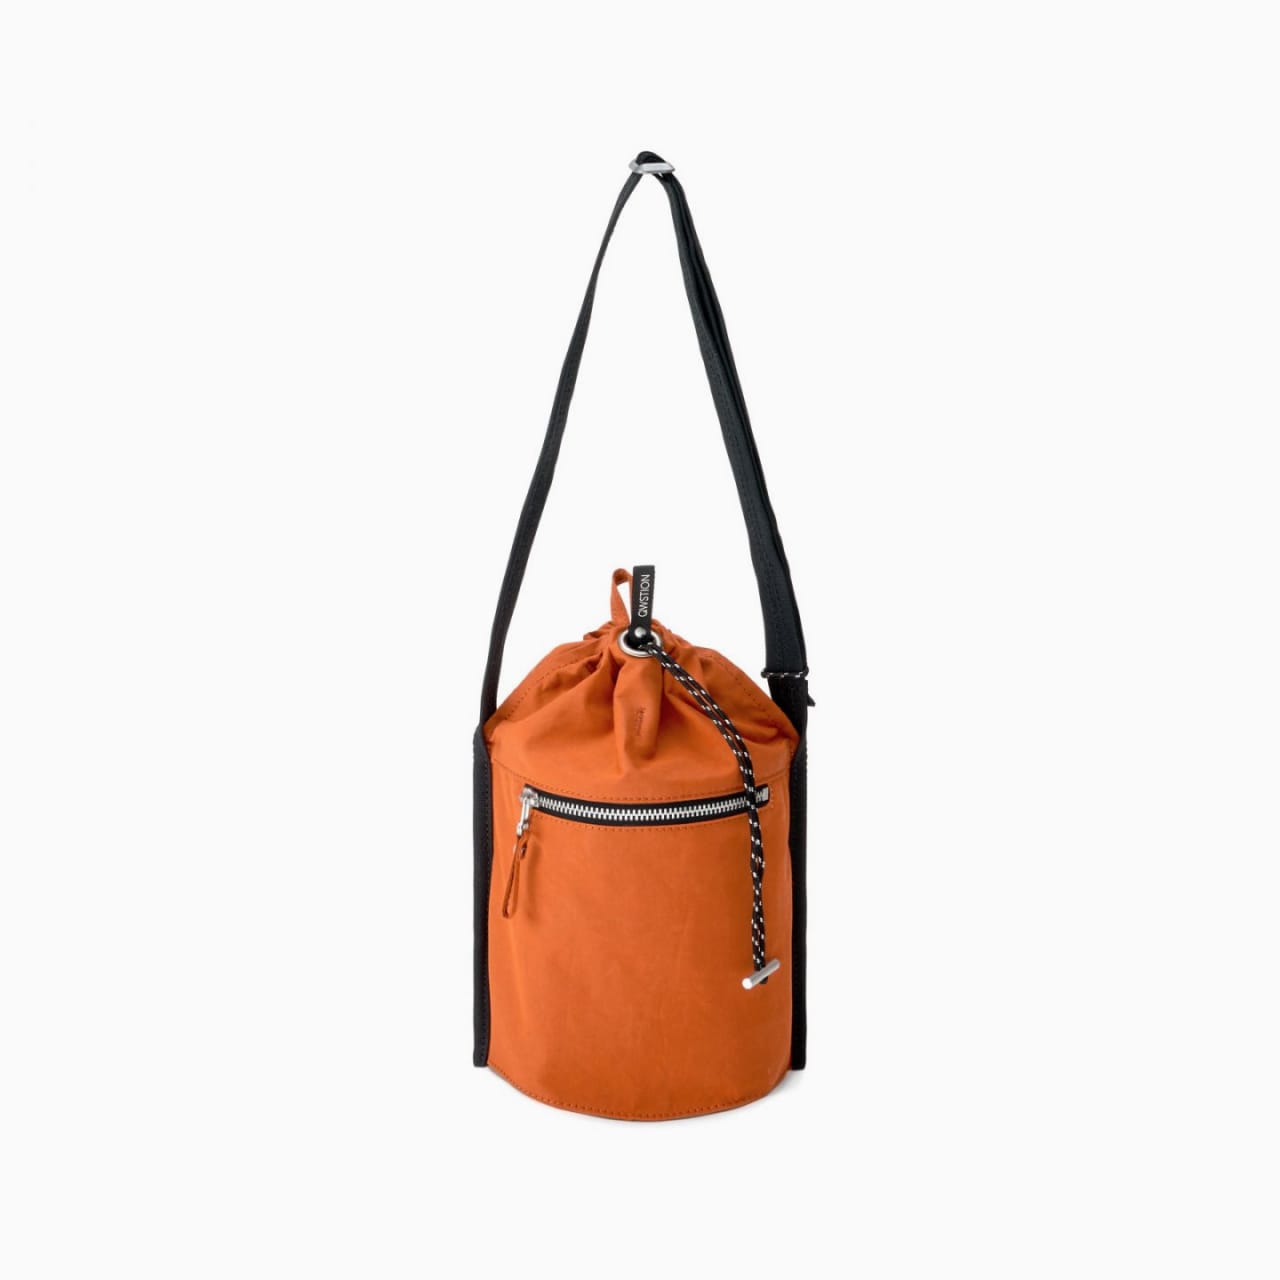 Orange canvas cylindrical bag with drawstring top, front zipper pouch, and black shoulder strap.